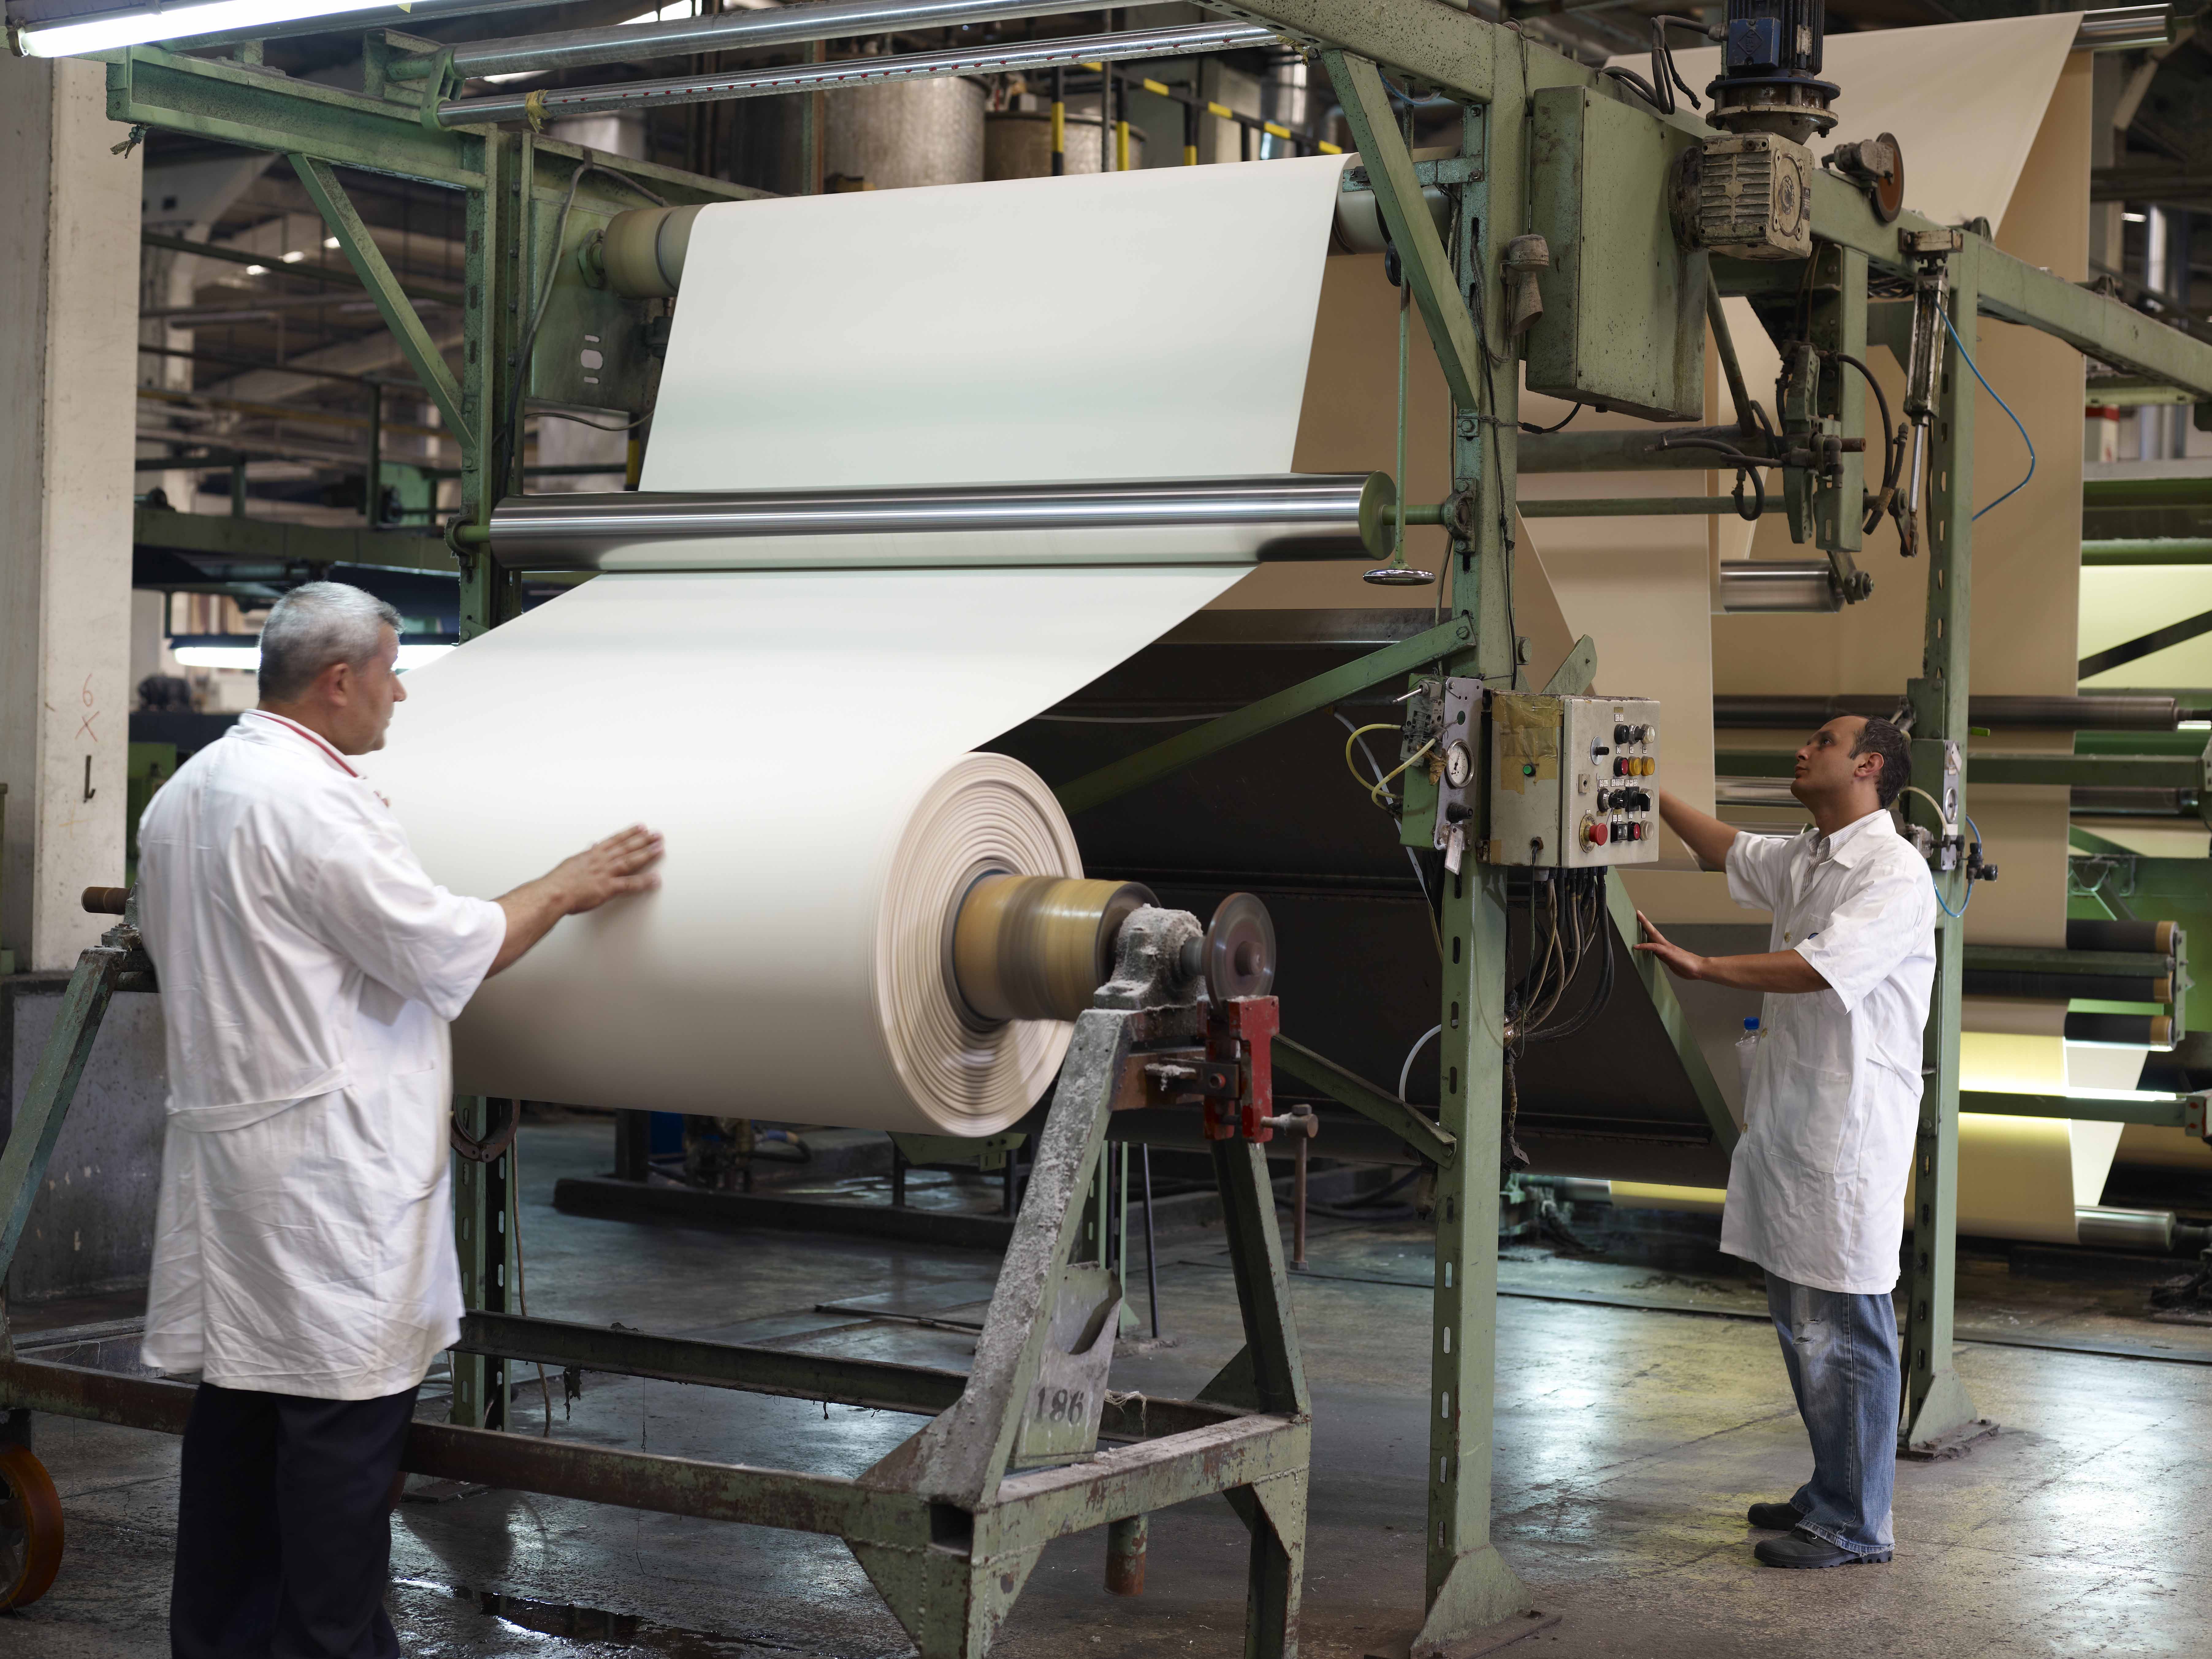 Textile fibre and yarn, hide and pelt processing machine operators